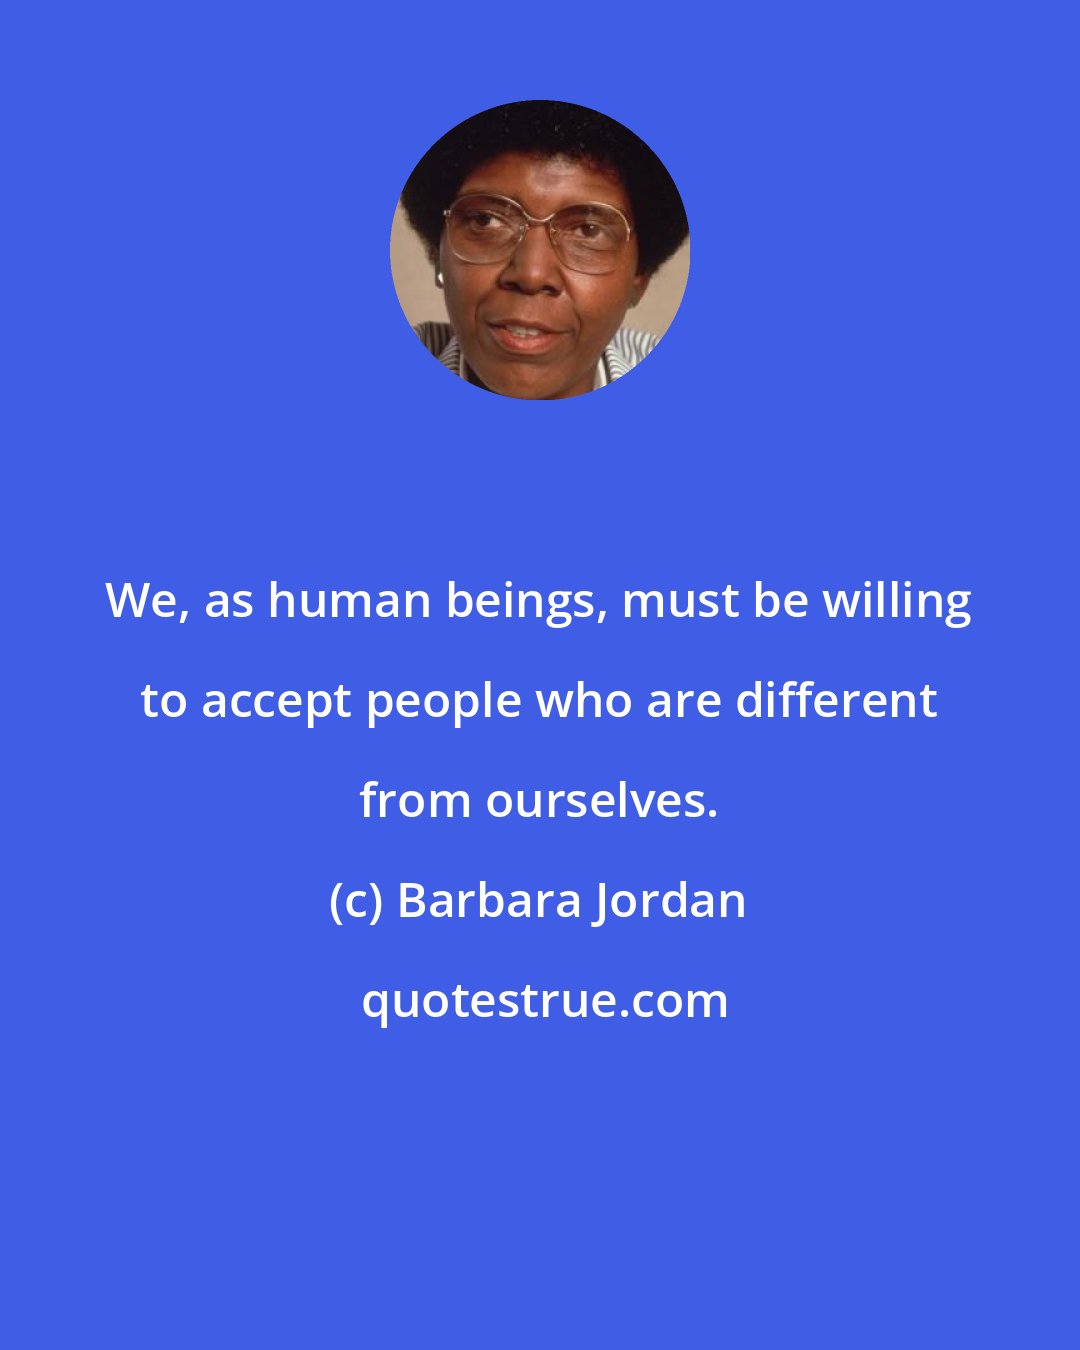 Barbara Jordan: We, as human beings, must be willing to accept people who are different from ourselves.